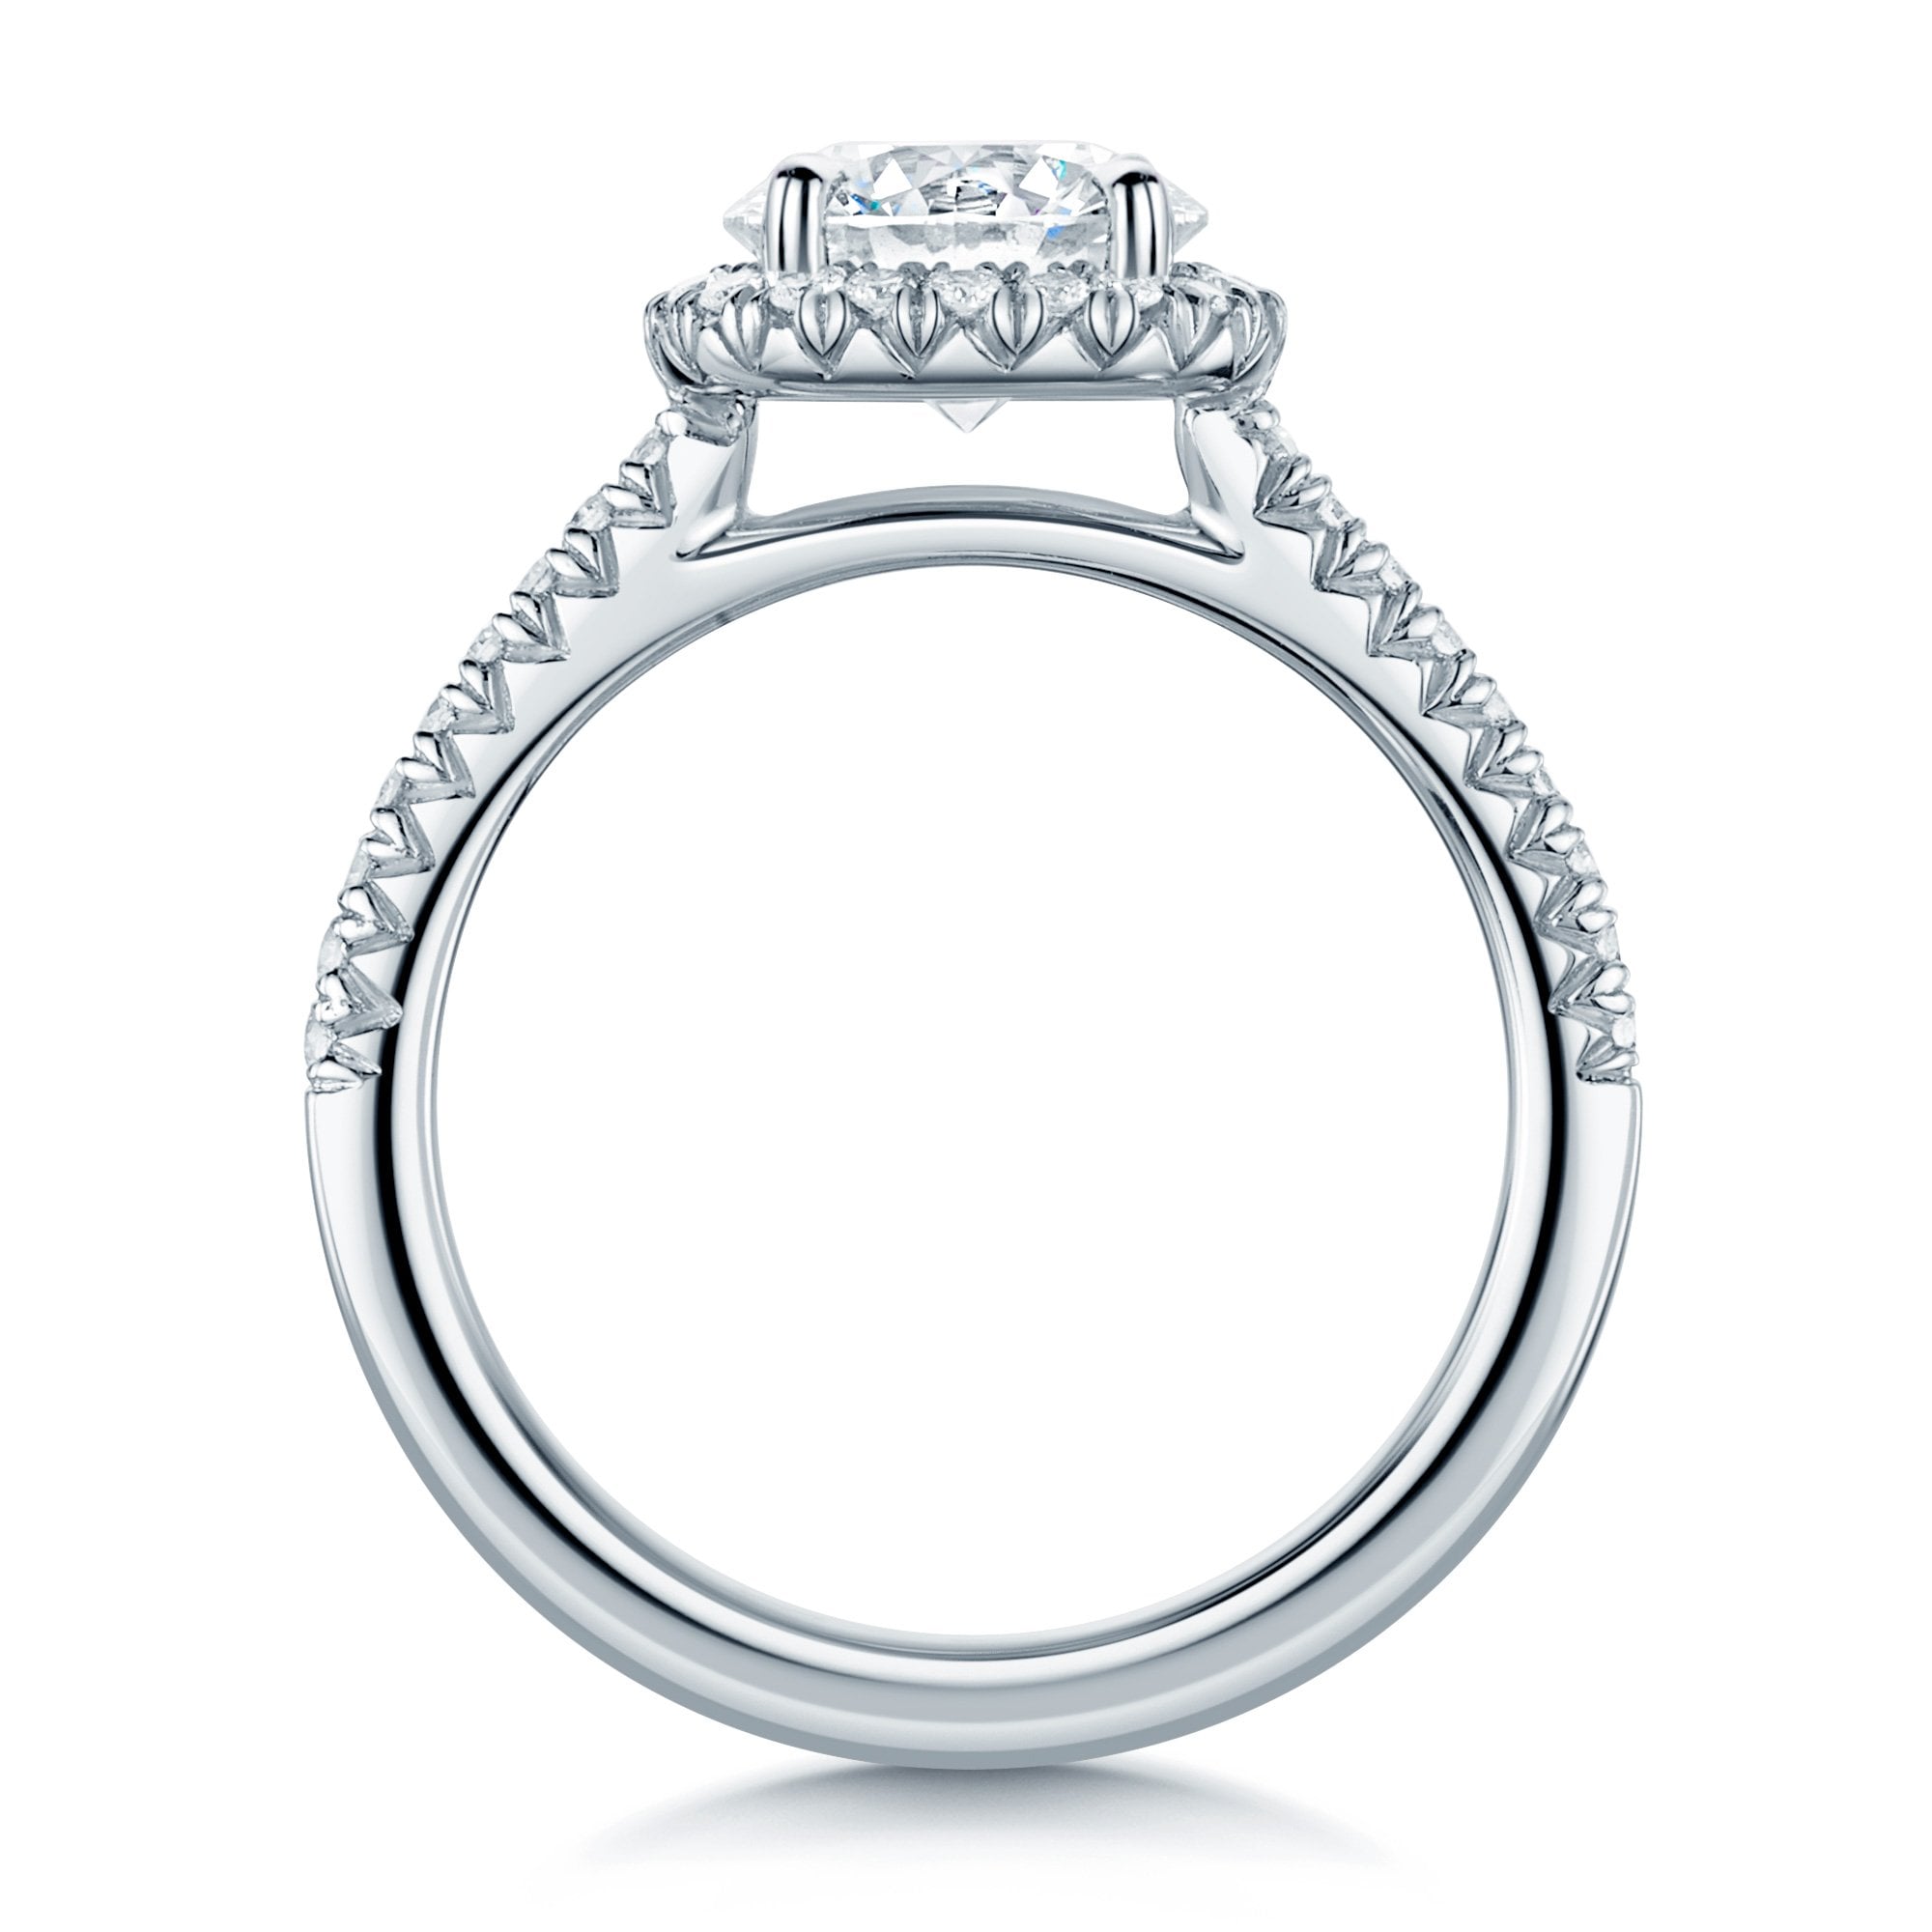 Platinum GIA Certificated Round Brilliant Cut Diamond Halo Ring With Diamond Shoulders